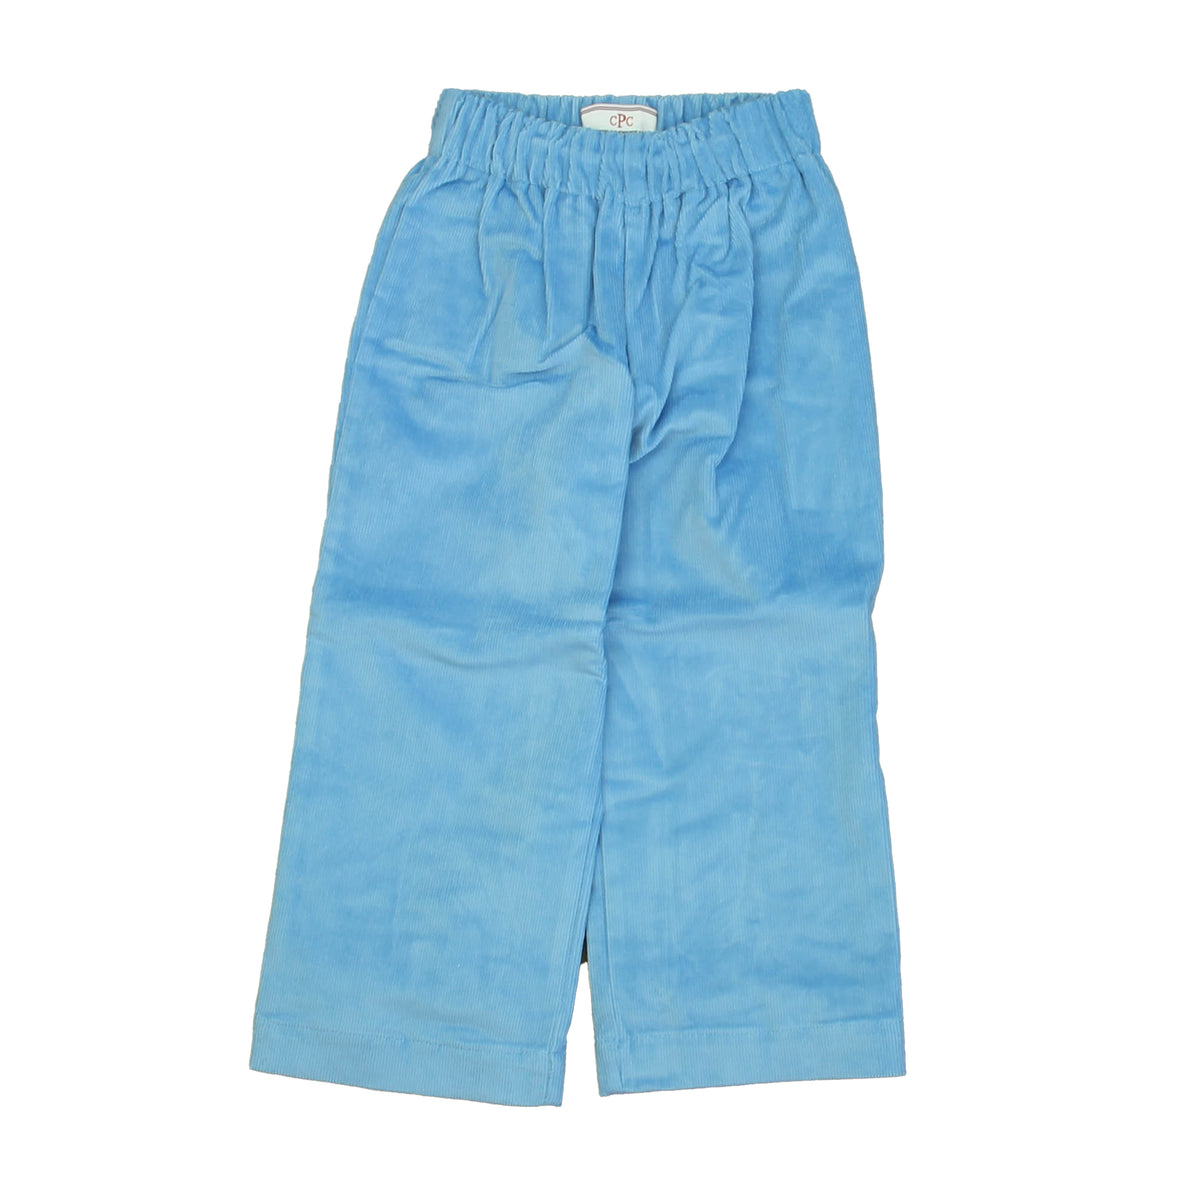 New with Tags: Alaskan Blue Pants size: 12-24 Months -- FINAL SALE